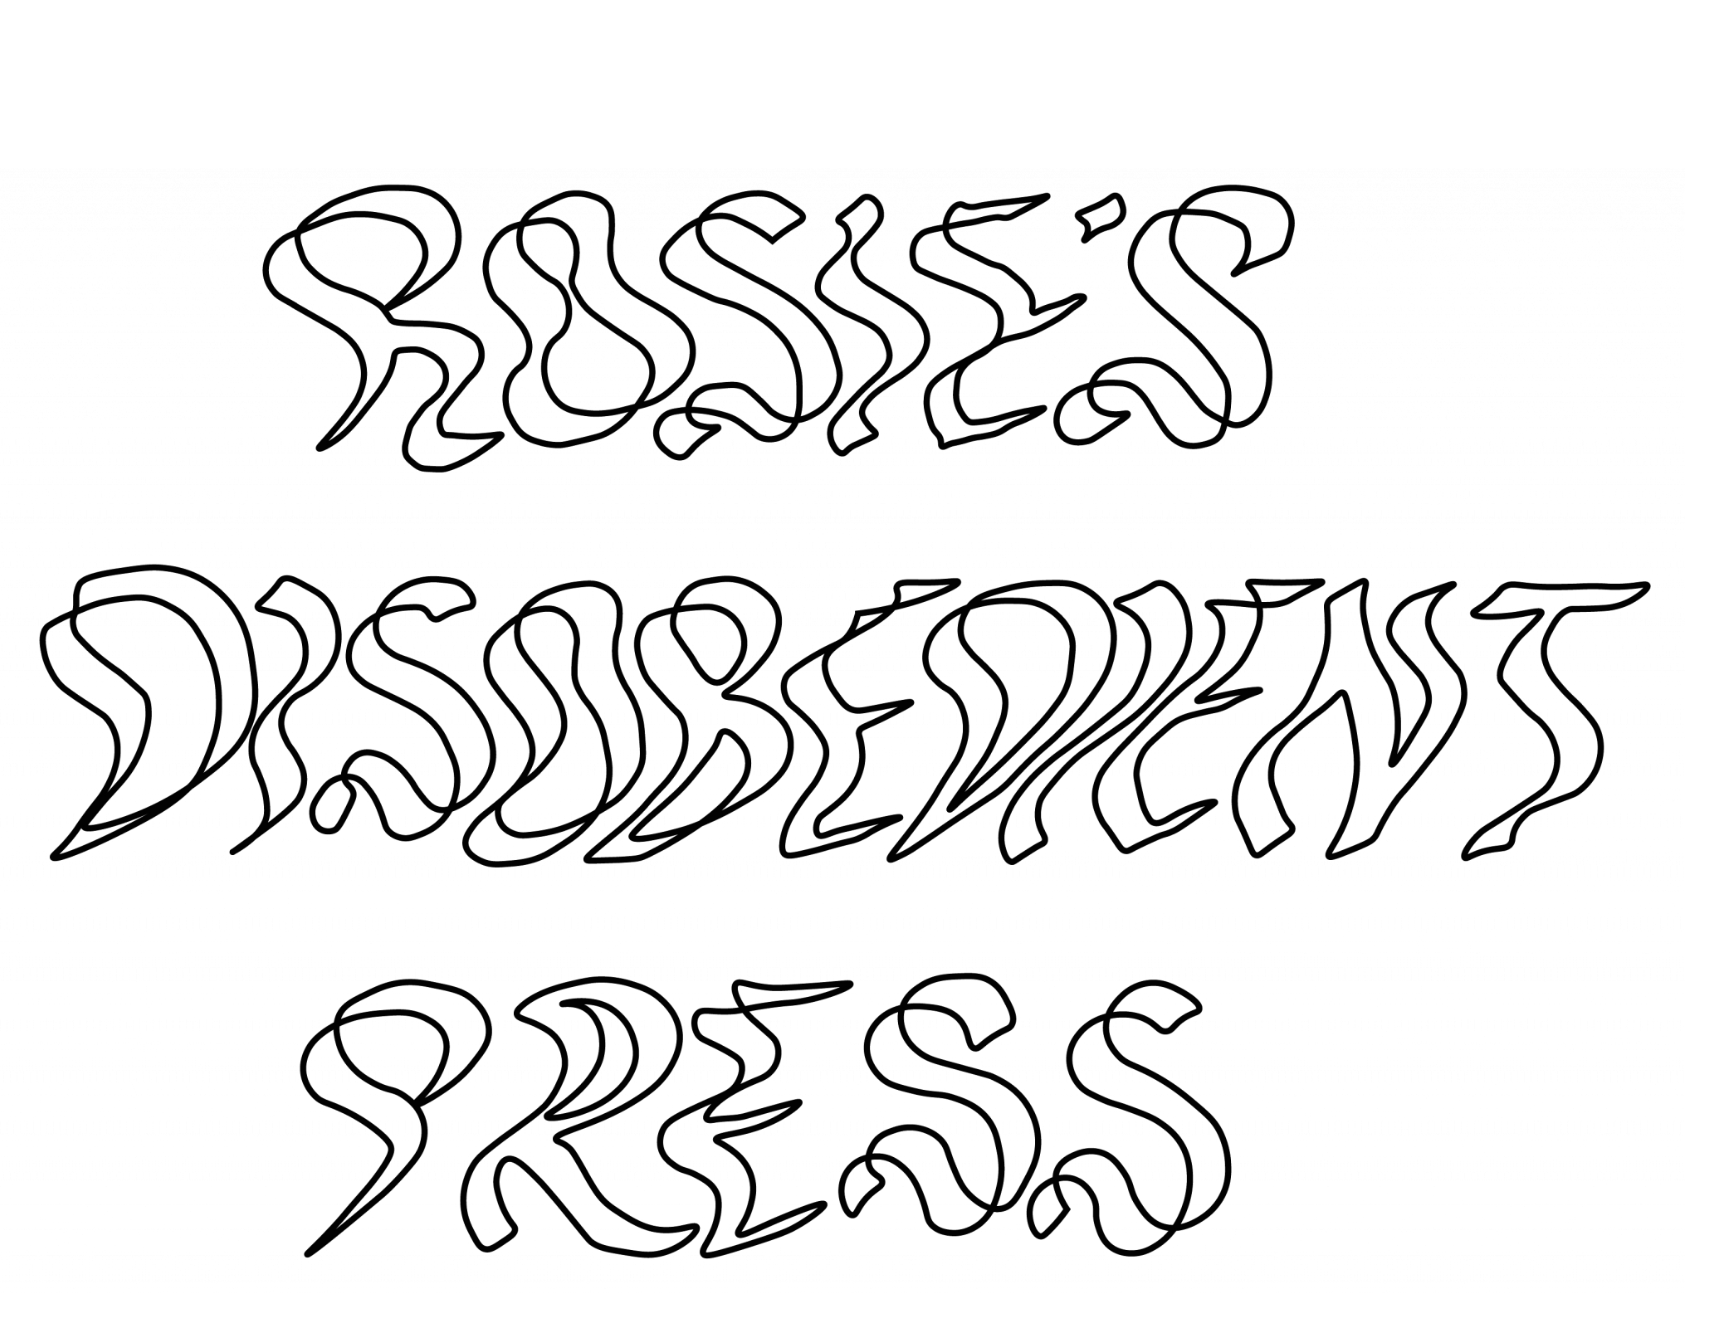 Rosie’s Disobedient Press –  Interviews with Juliet Jacques, K Patrick and Hussien Mitha